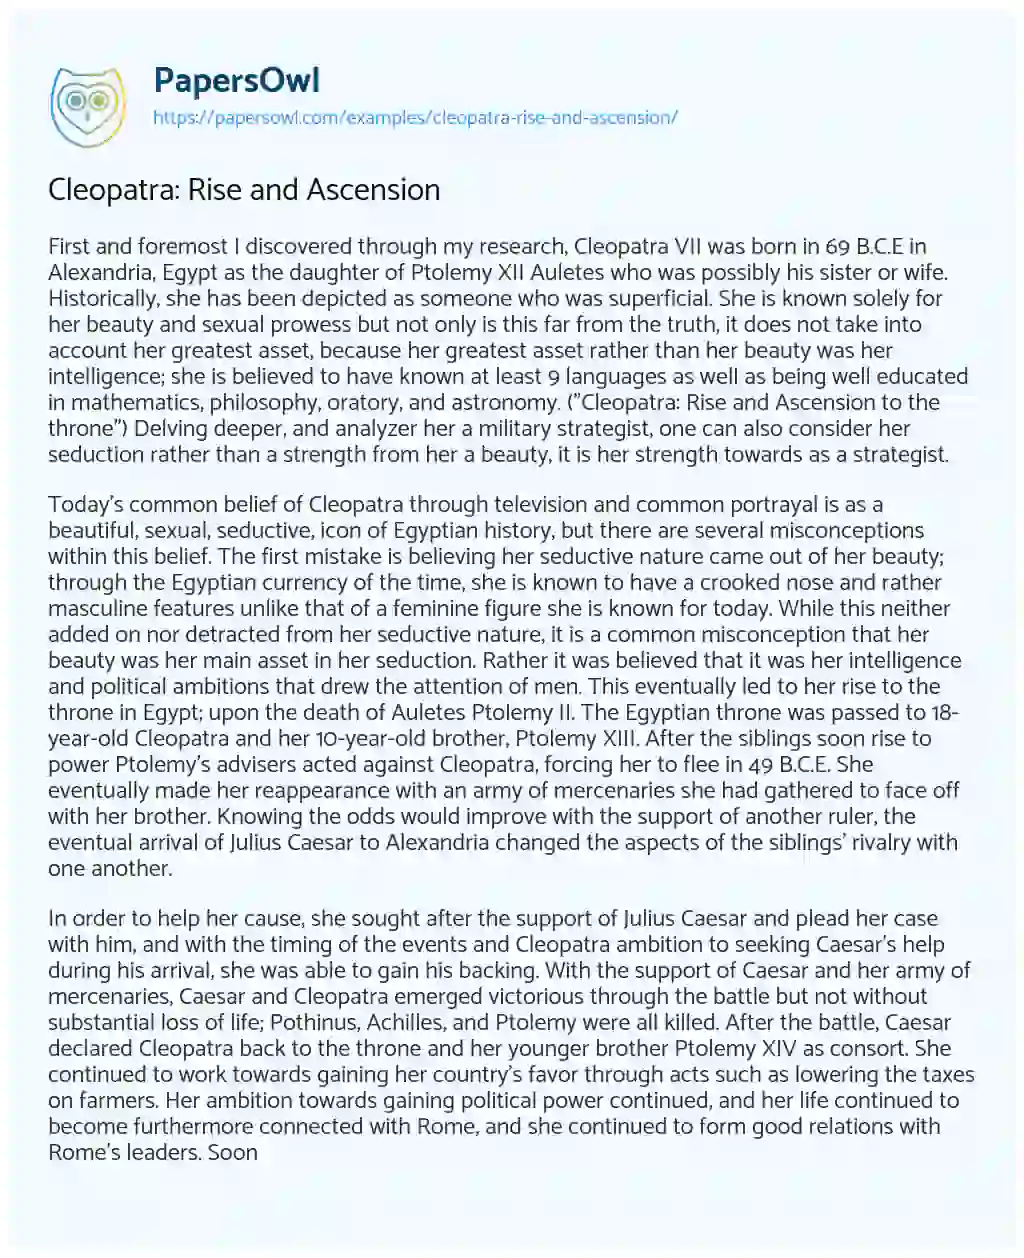 Cleopatra: Rise and Ascension essay